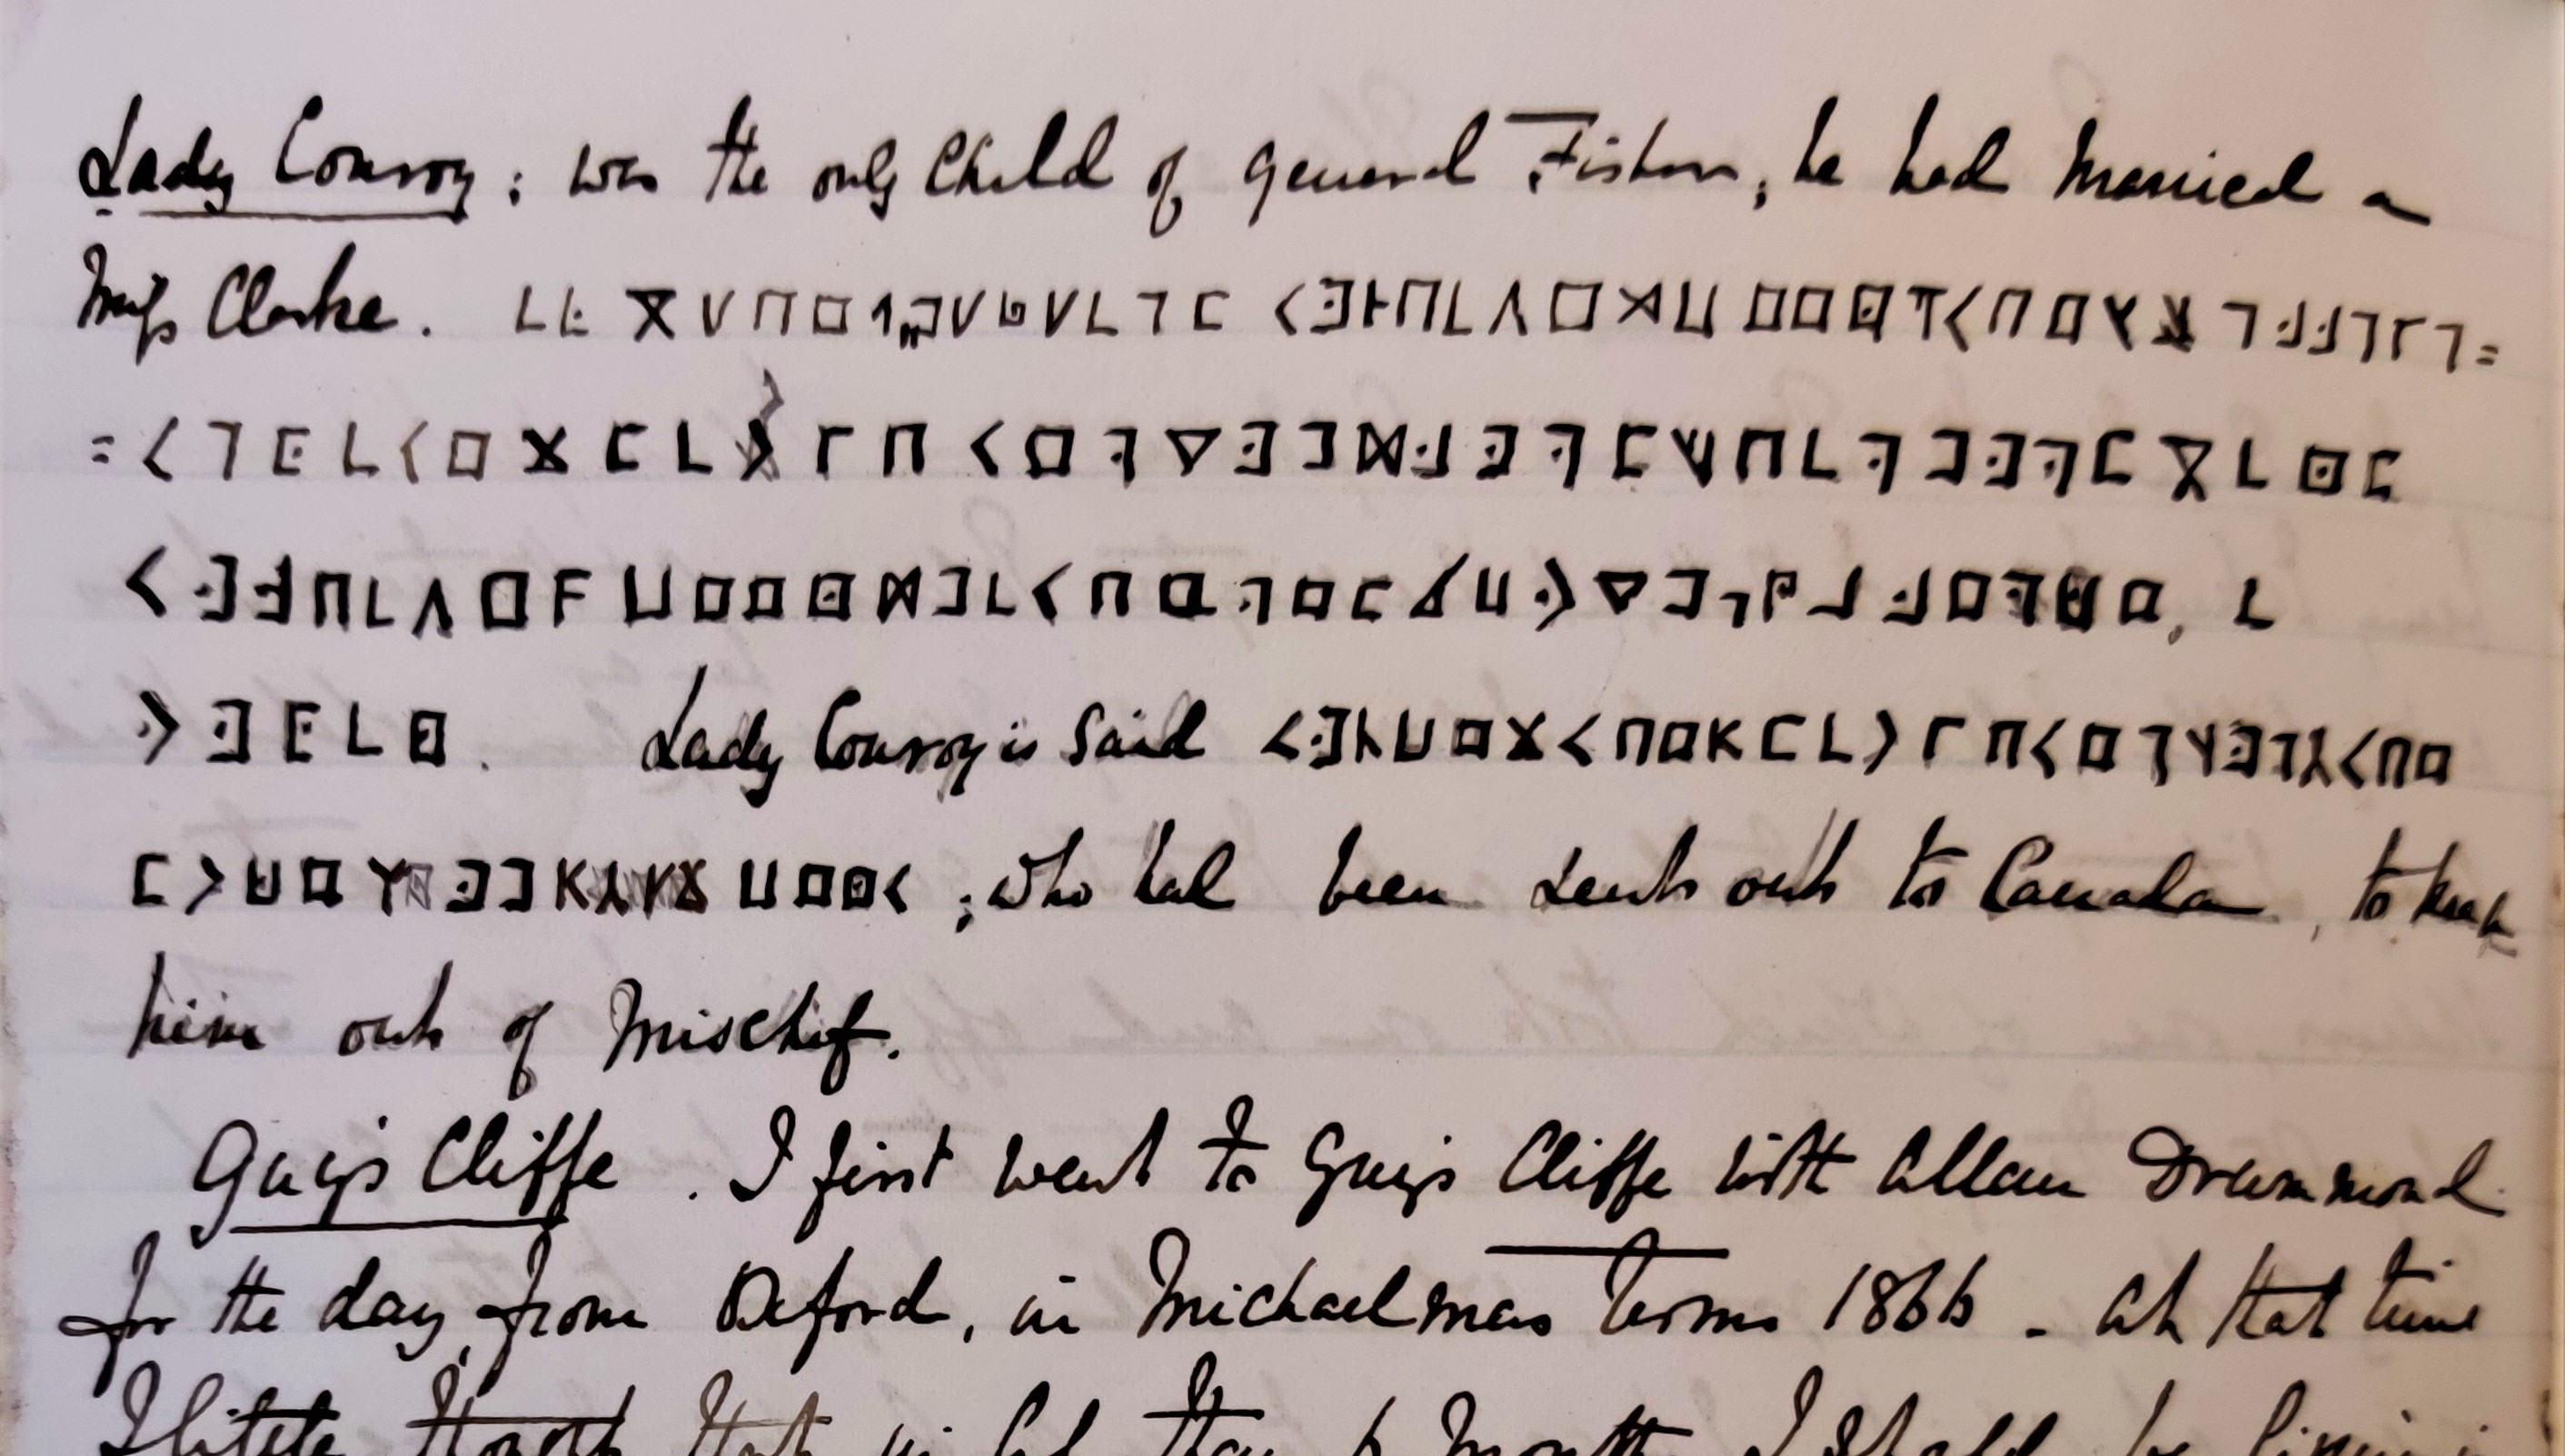 detail of John Conroy's diary in ink showing cryptogram